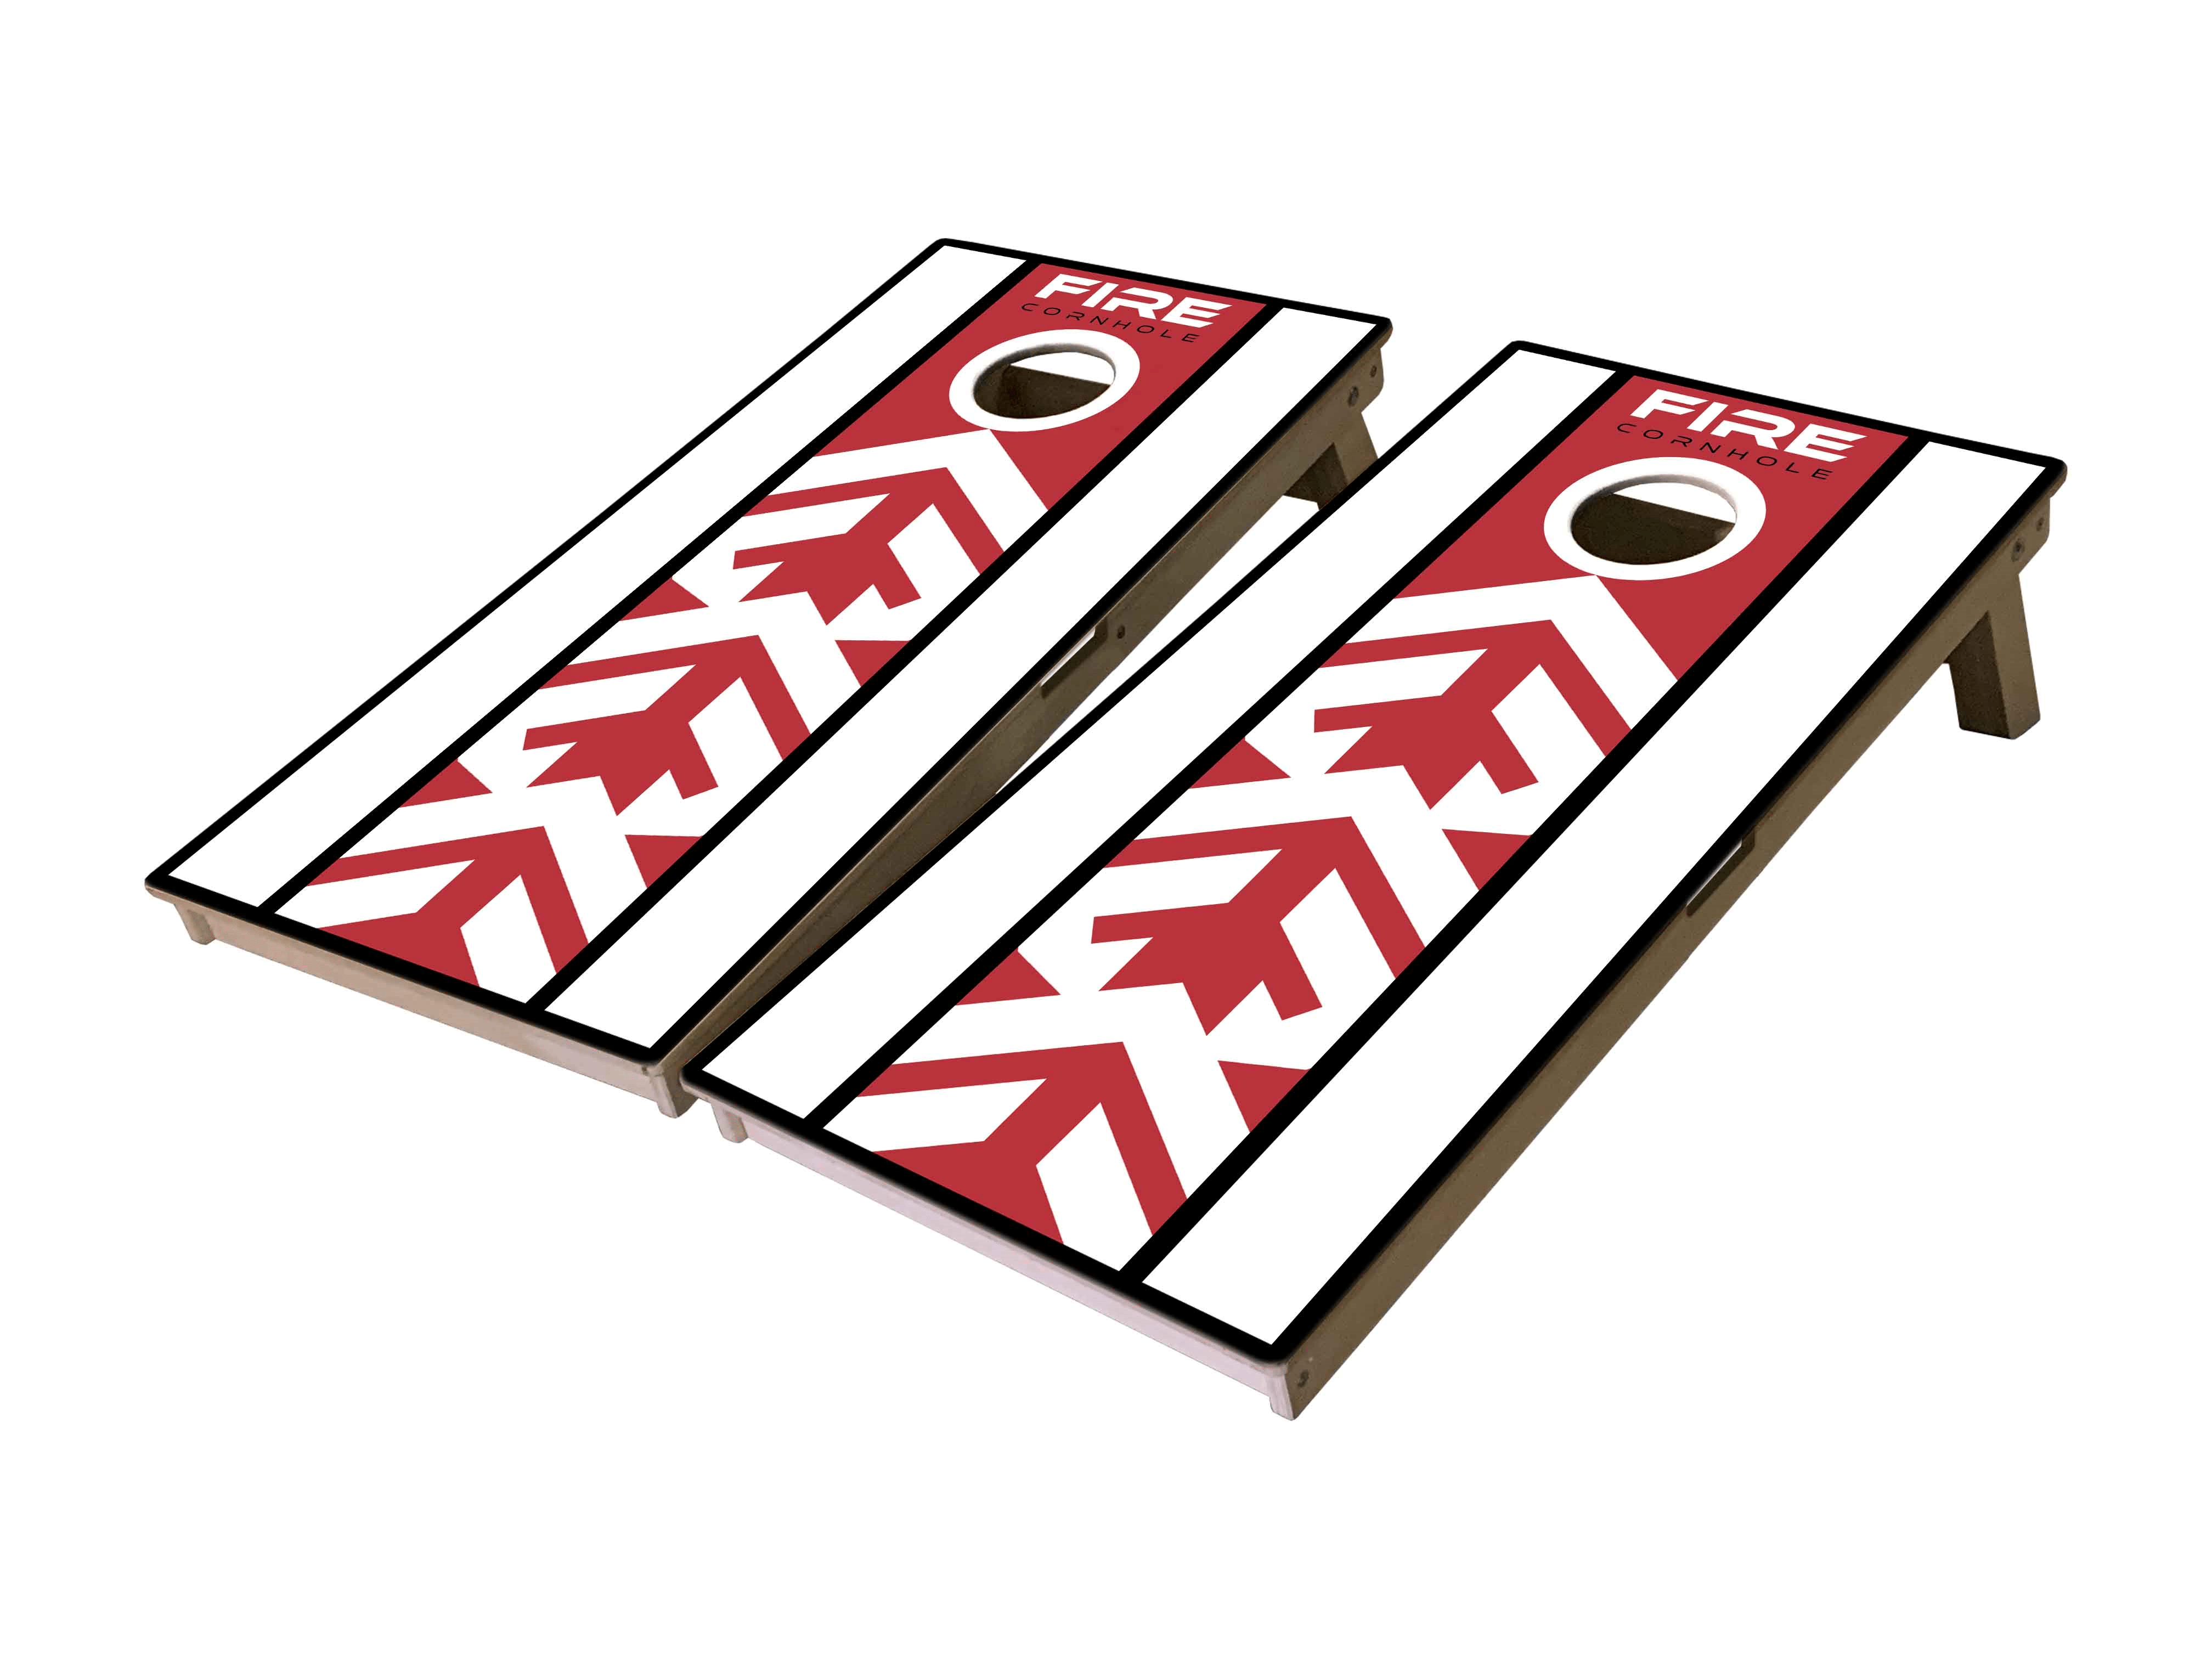 Fire Cornhole boards in red, white, and black